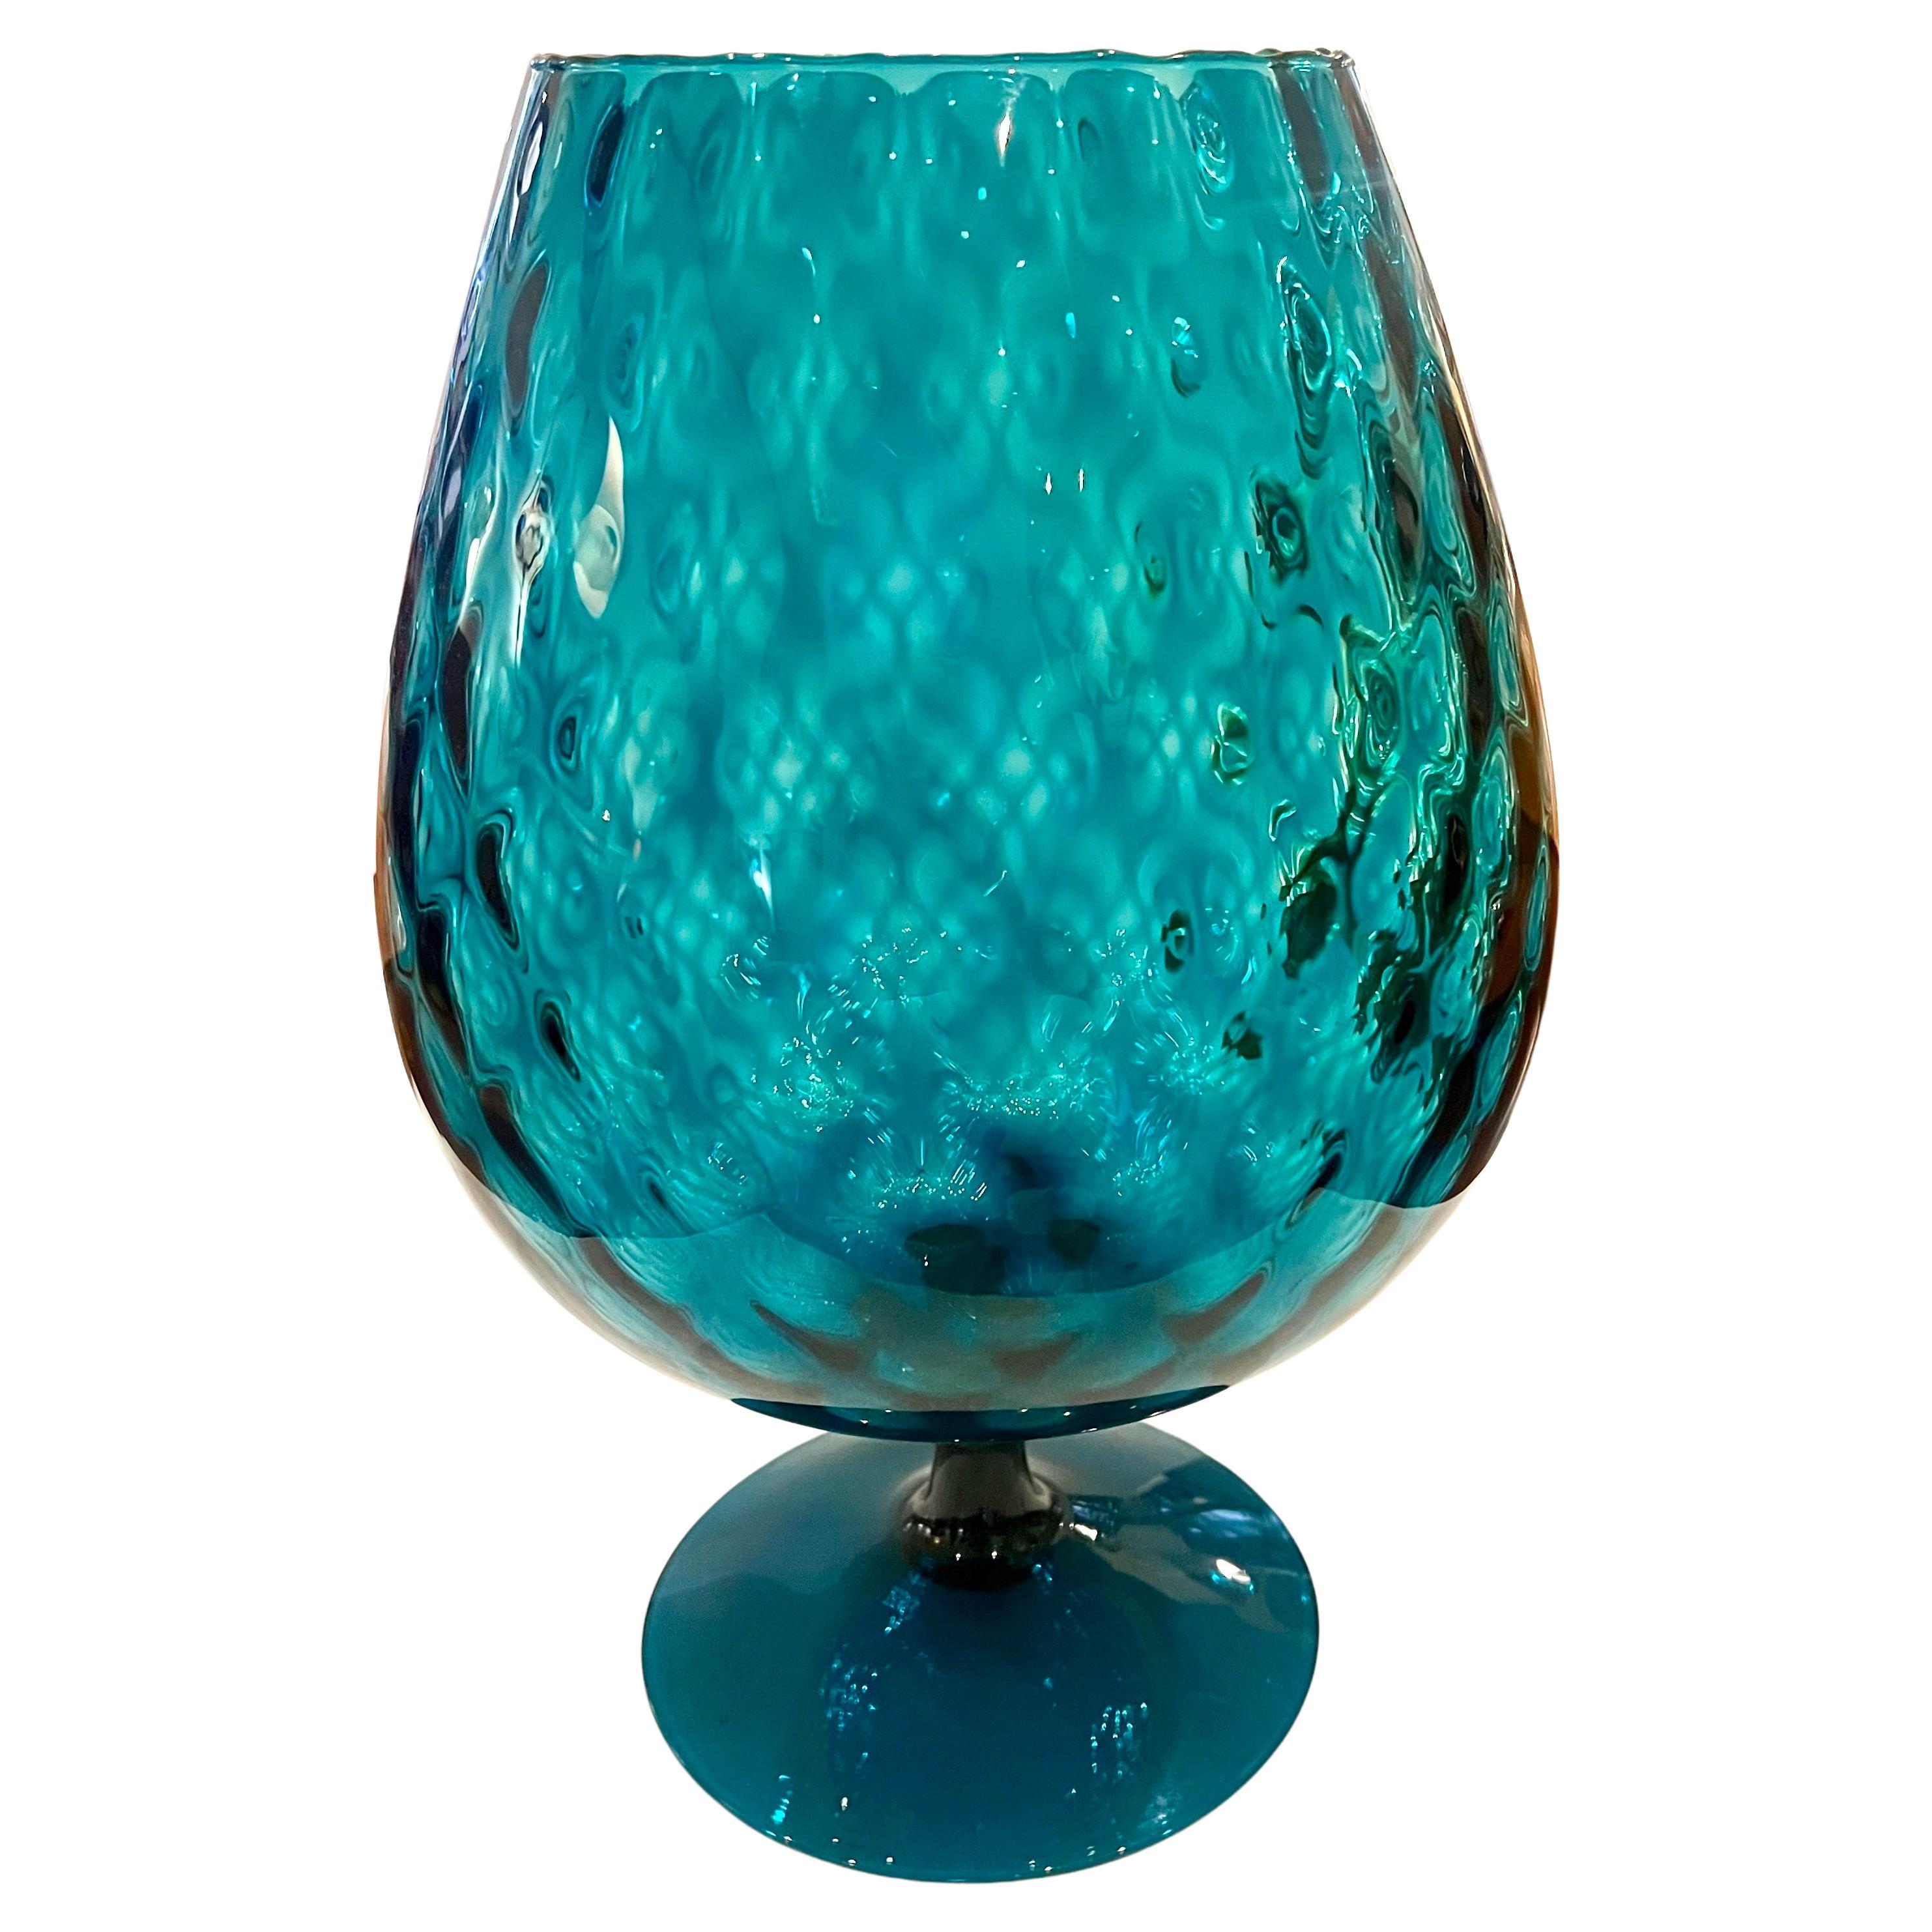 Beautiful Giant goblet Empoli glass vase, excellent condition great color.